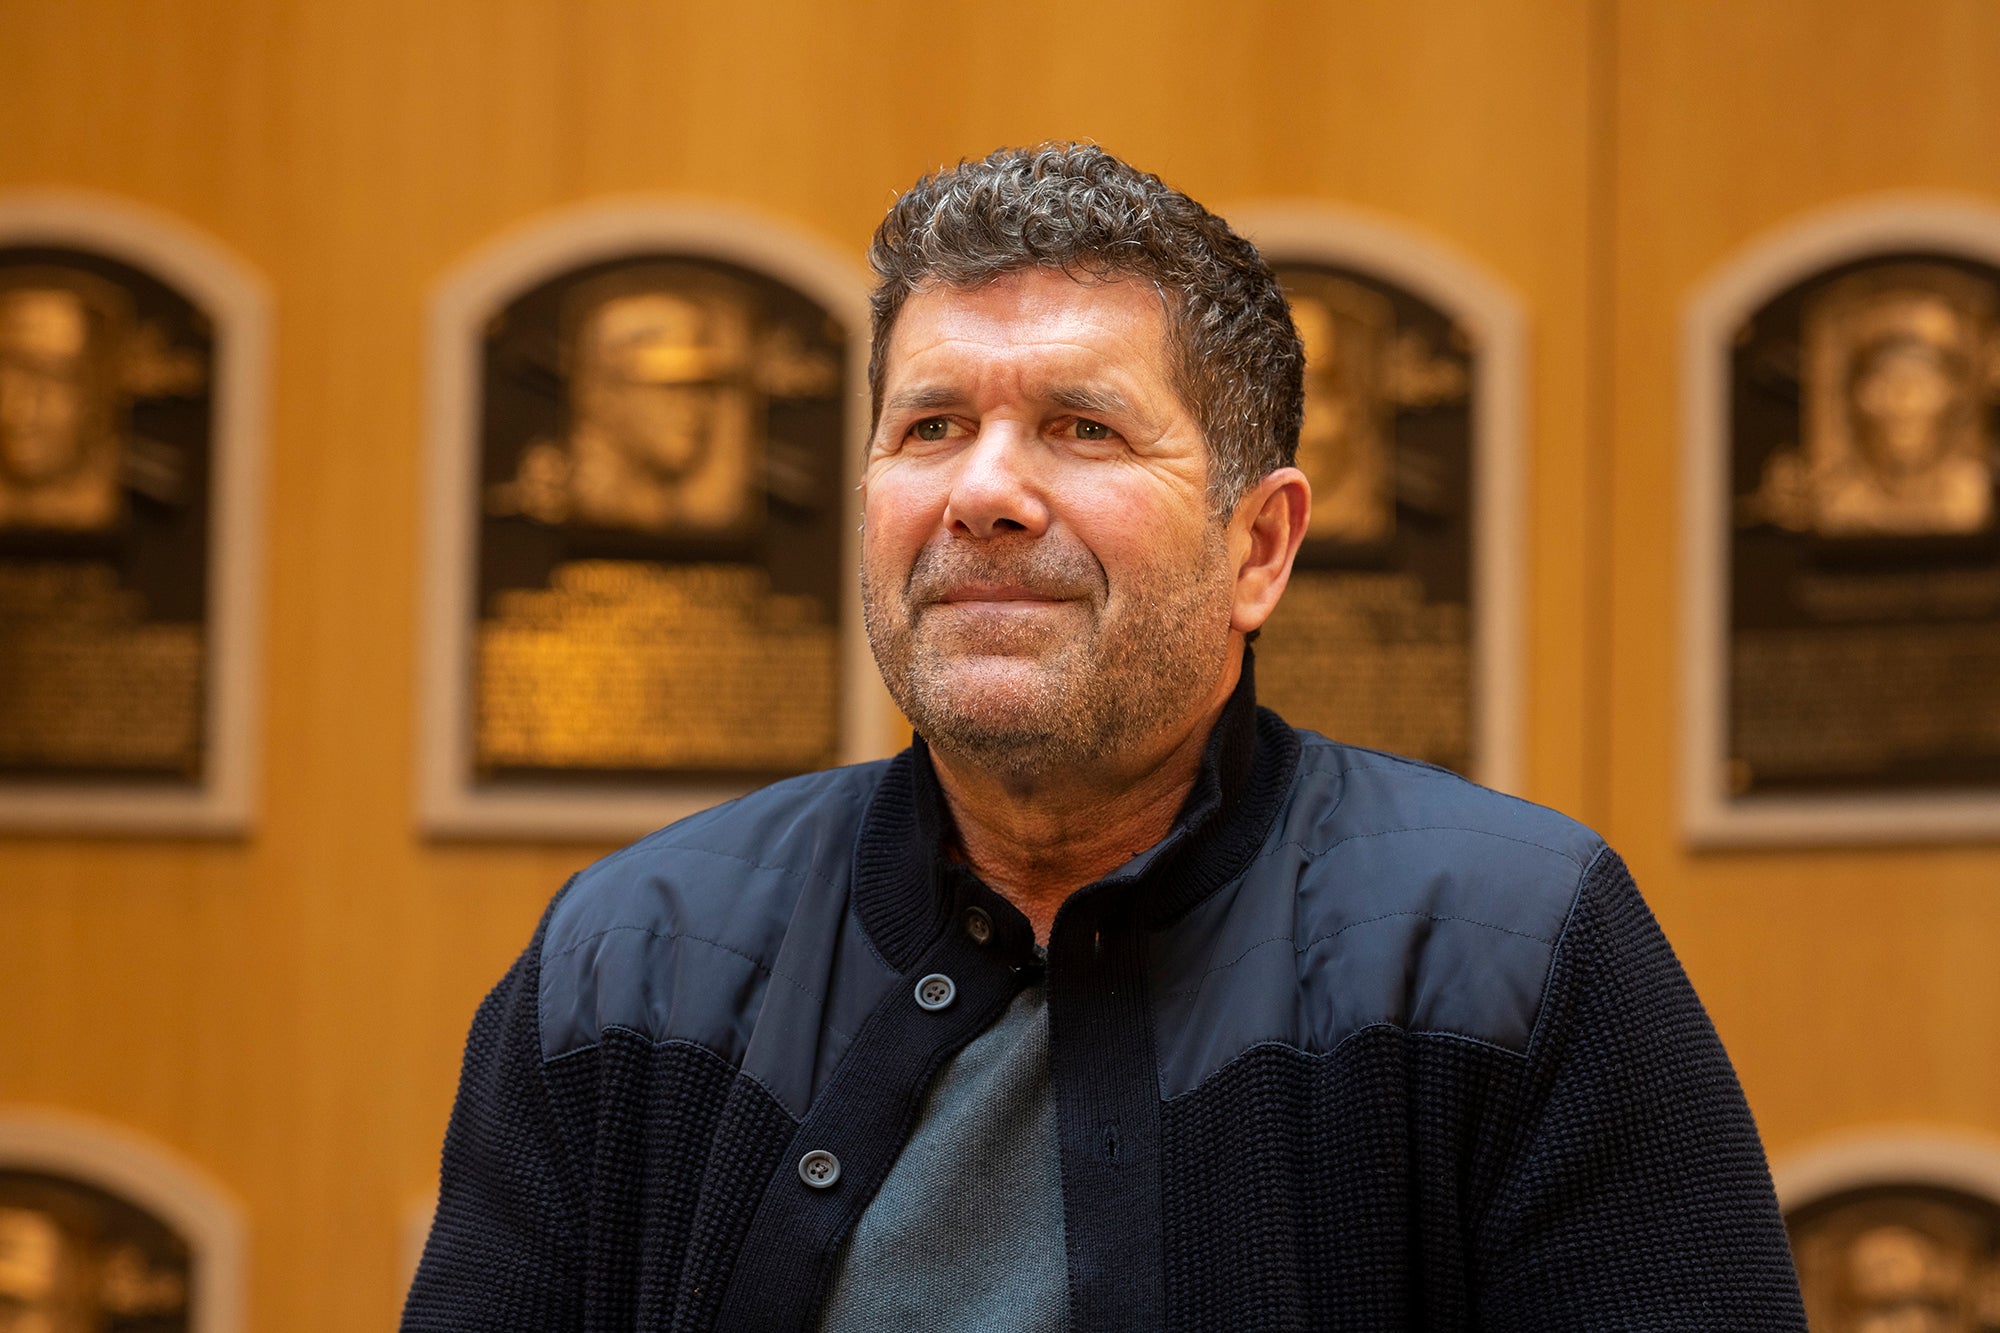 Inside the room: Edgar Martinez brings his trademark cool to Hall of Fame  moment